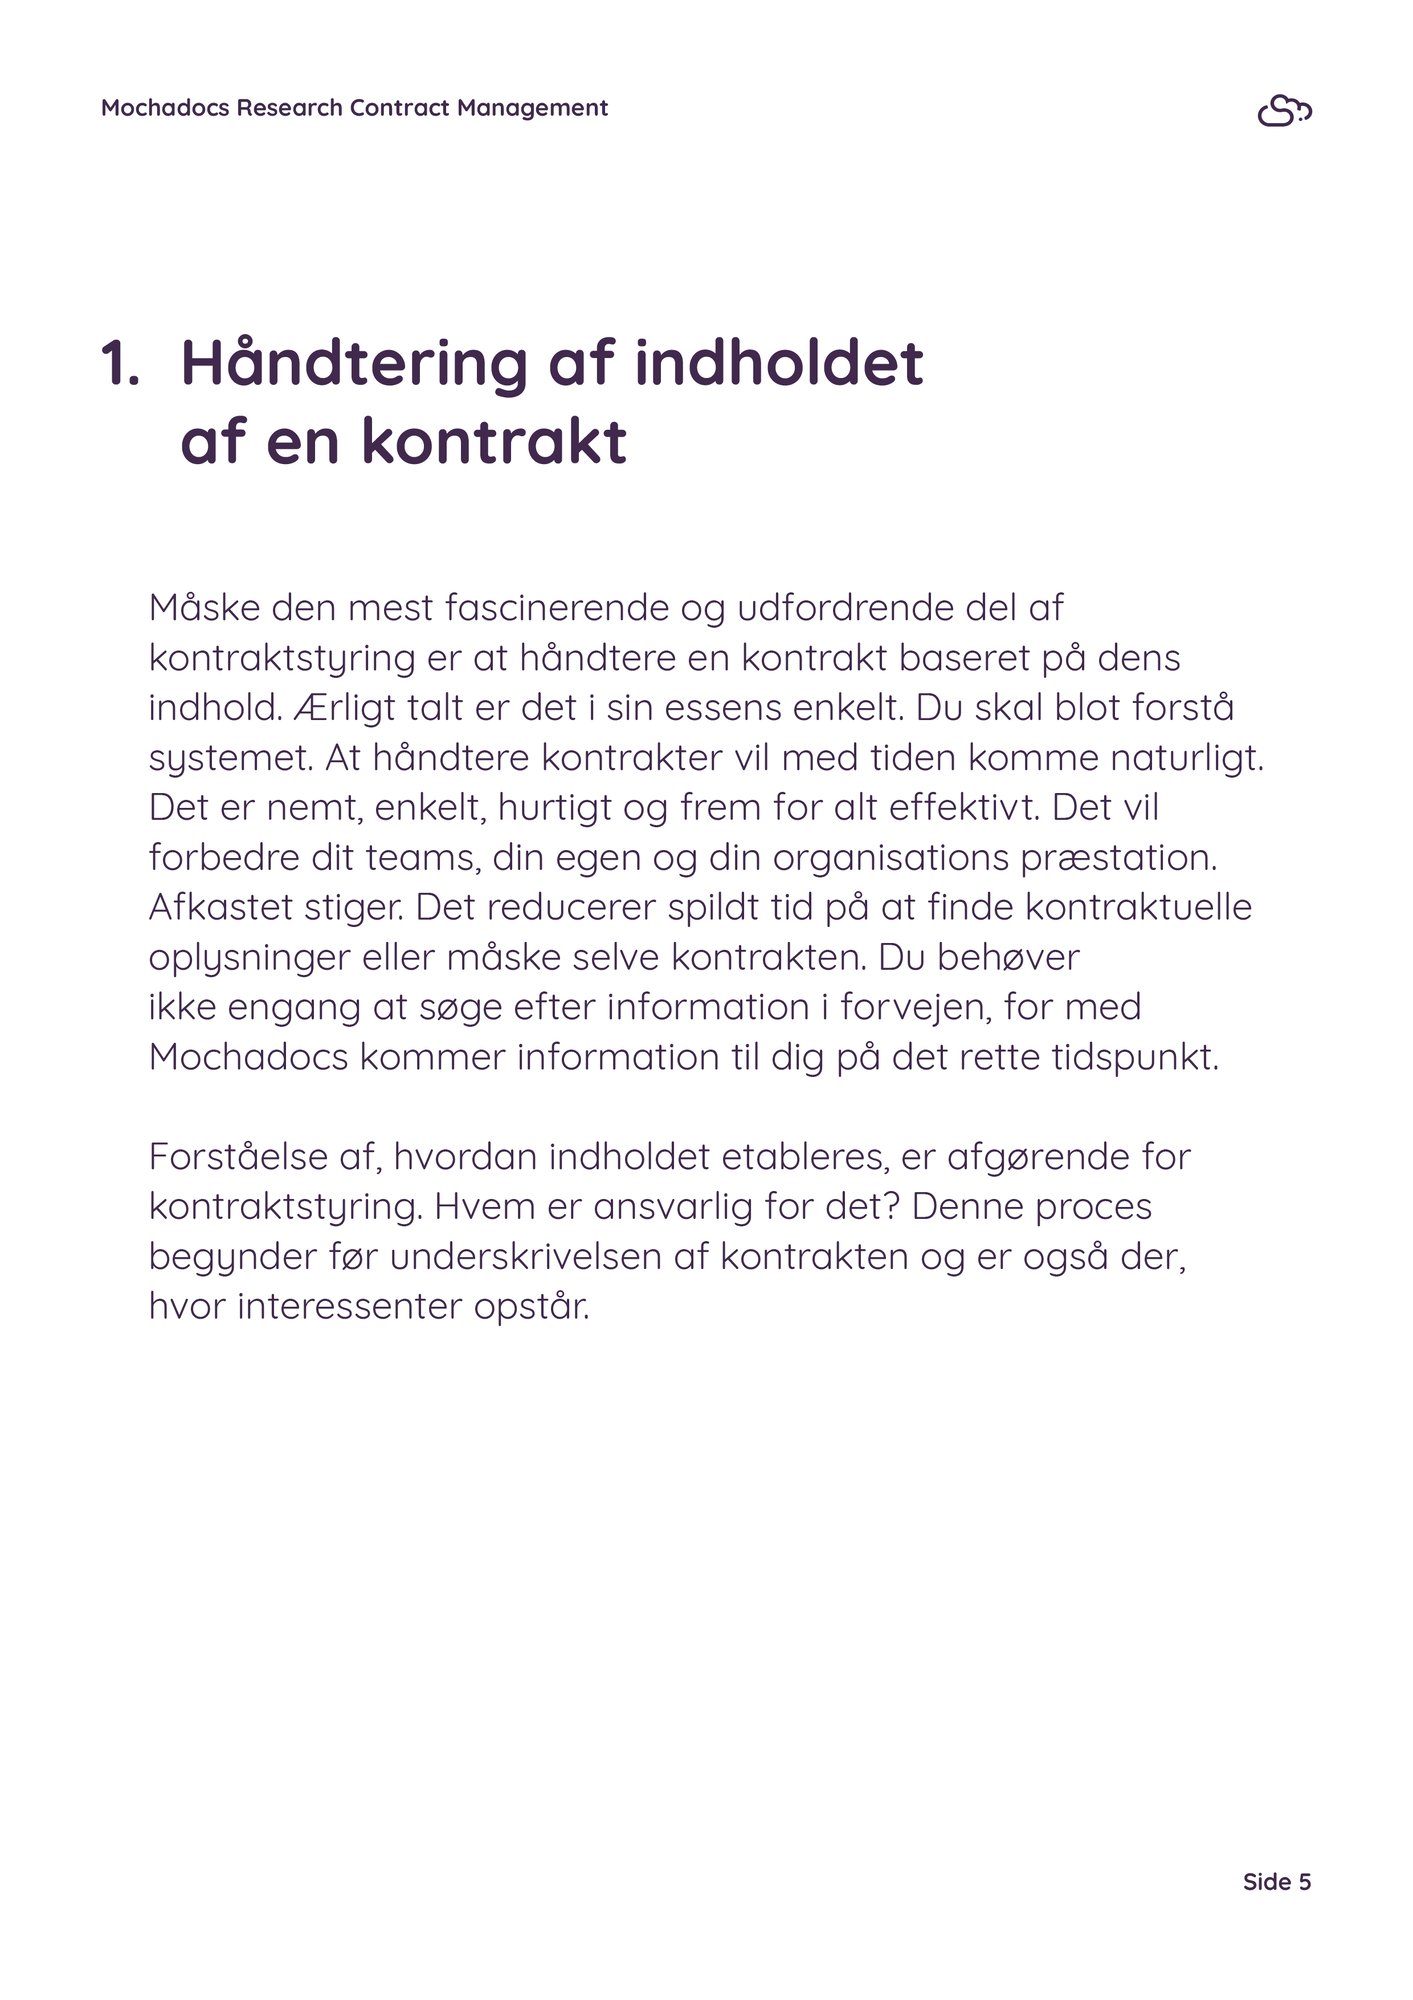 DE - The Contract Management Stakeholder5